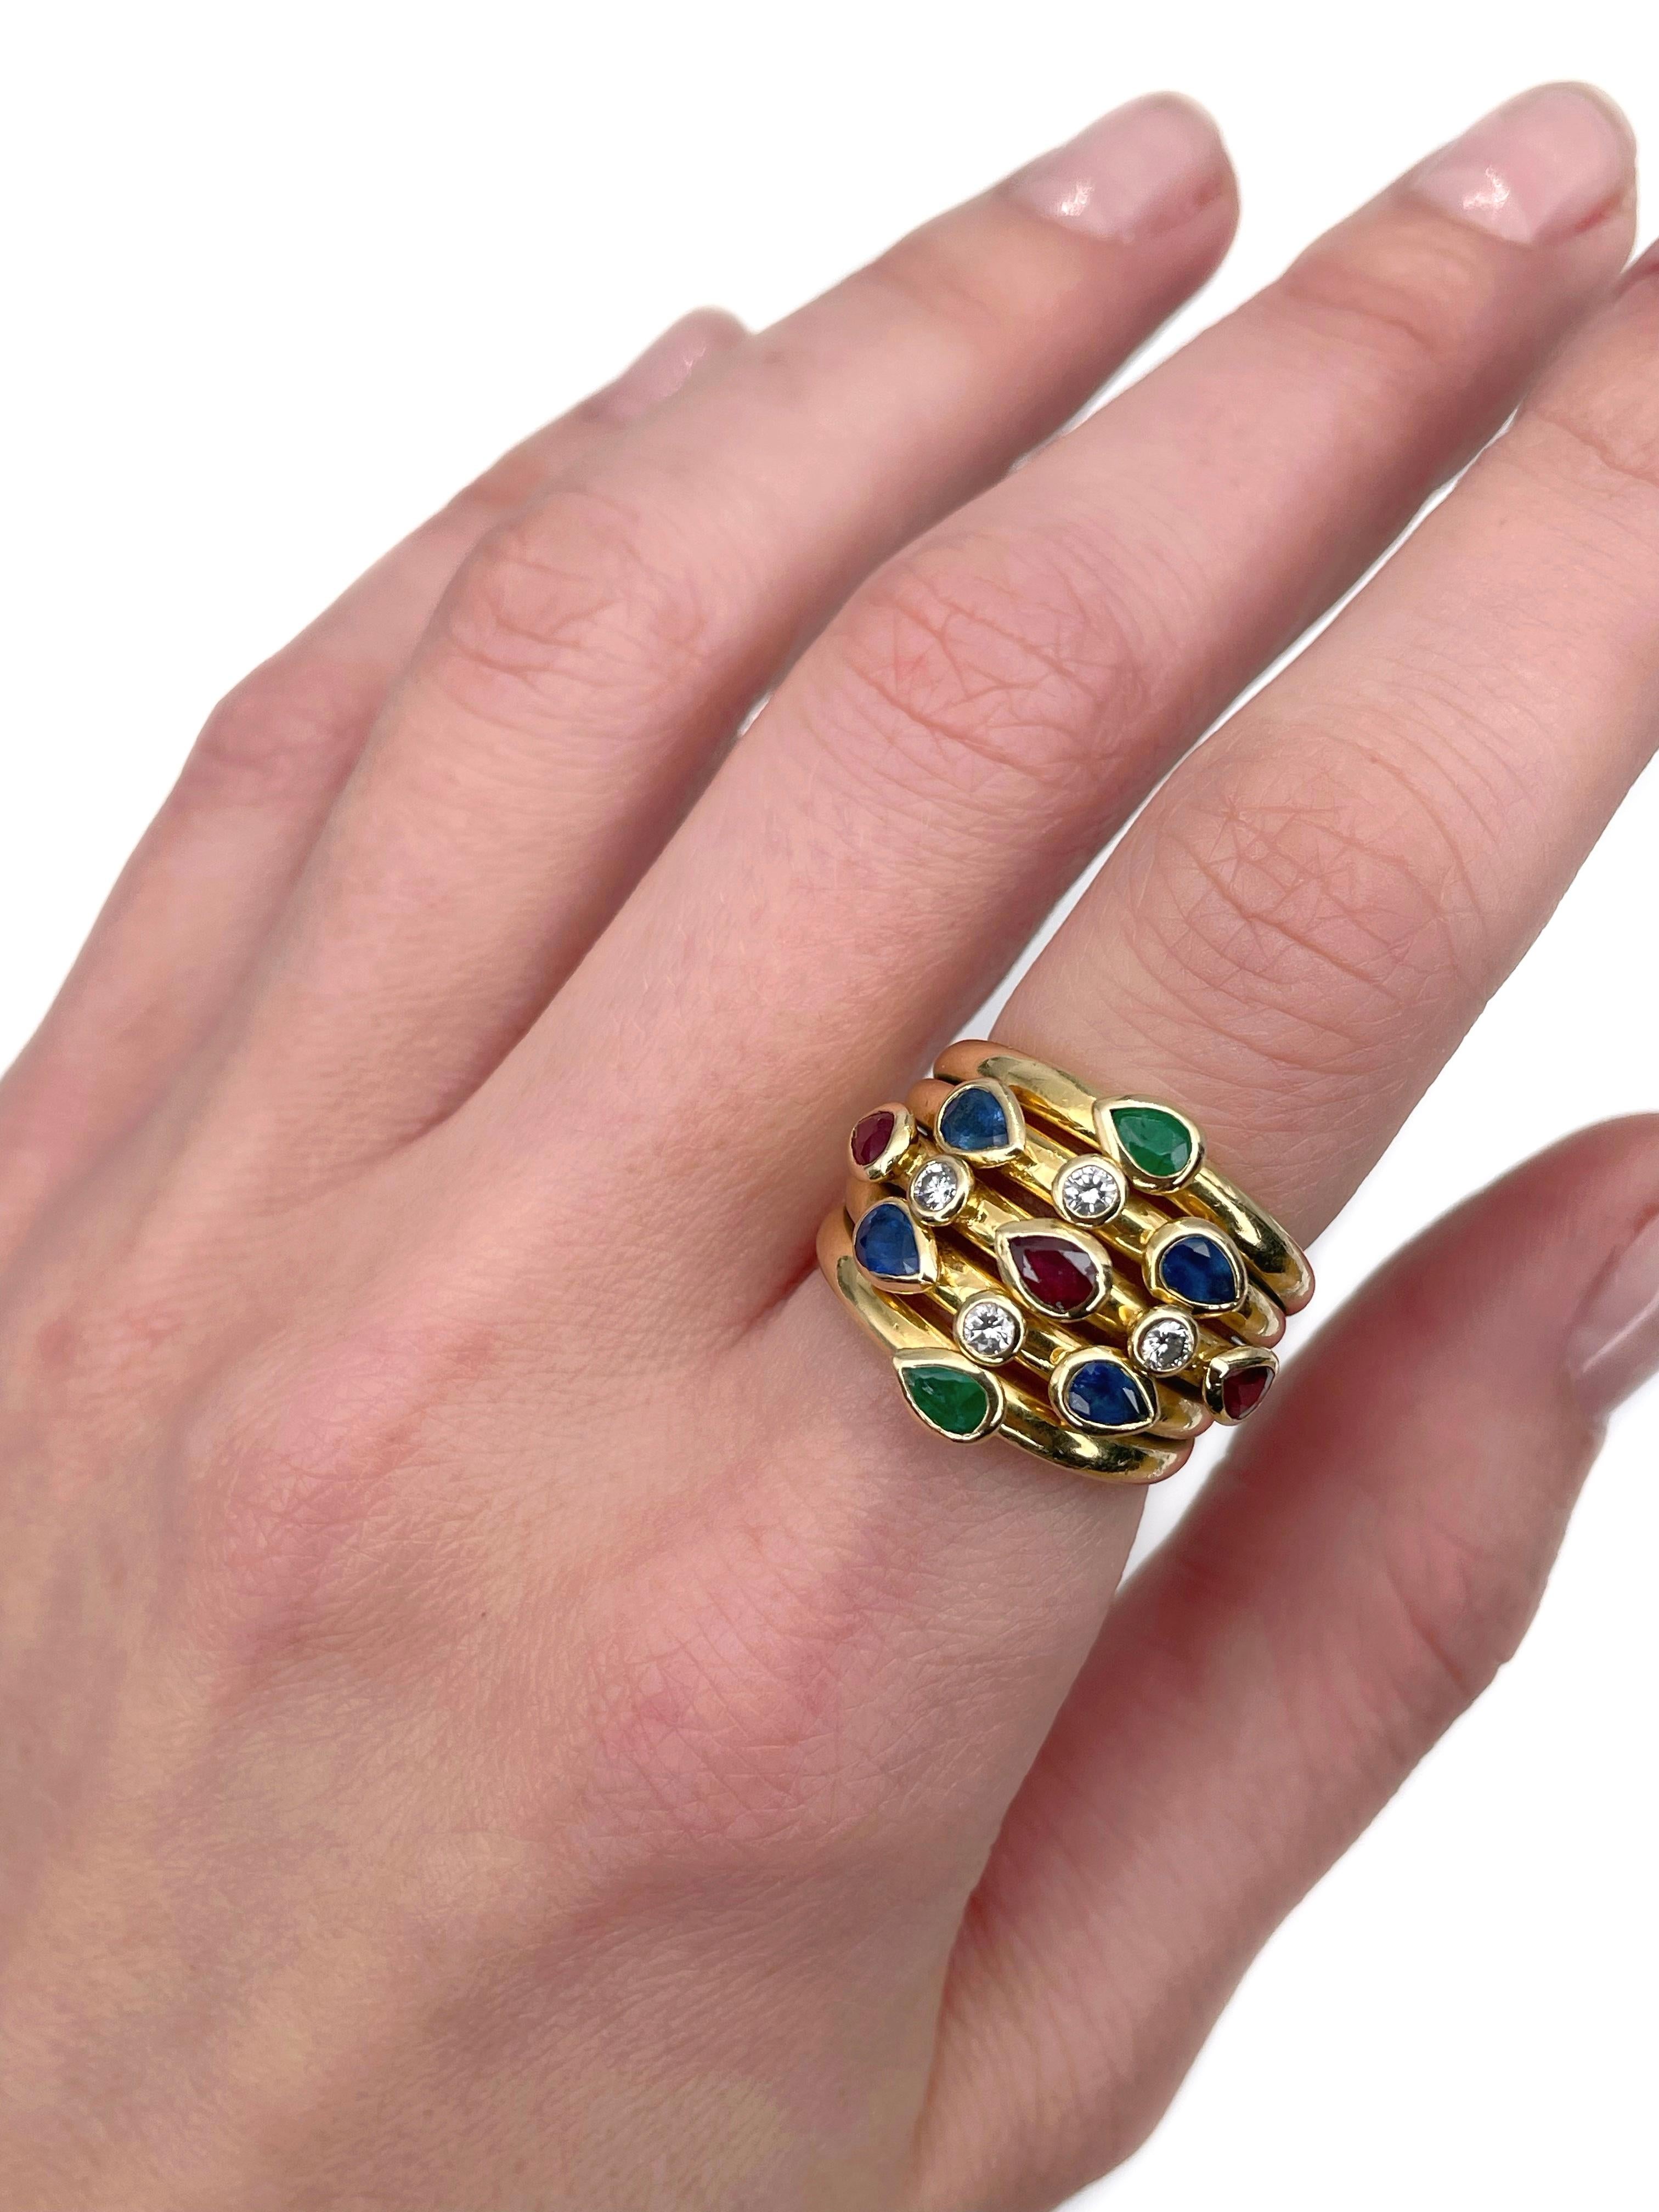 This is an amazing multi-gem five band ring designed by Adler for “Serail” collection. Circa 1990. 

It is crafted in 18K yellow gold. The piece features:
- 3 rubies (pear cut, TW 0.50ct, slpR 7/4, VS-SI)
- 4 sapphires (pear cut, TW 0.60ct, vB 5/3,